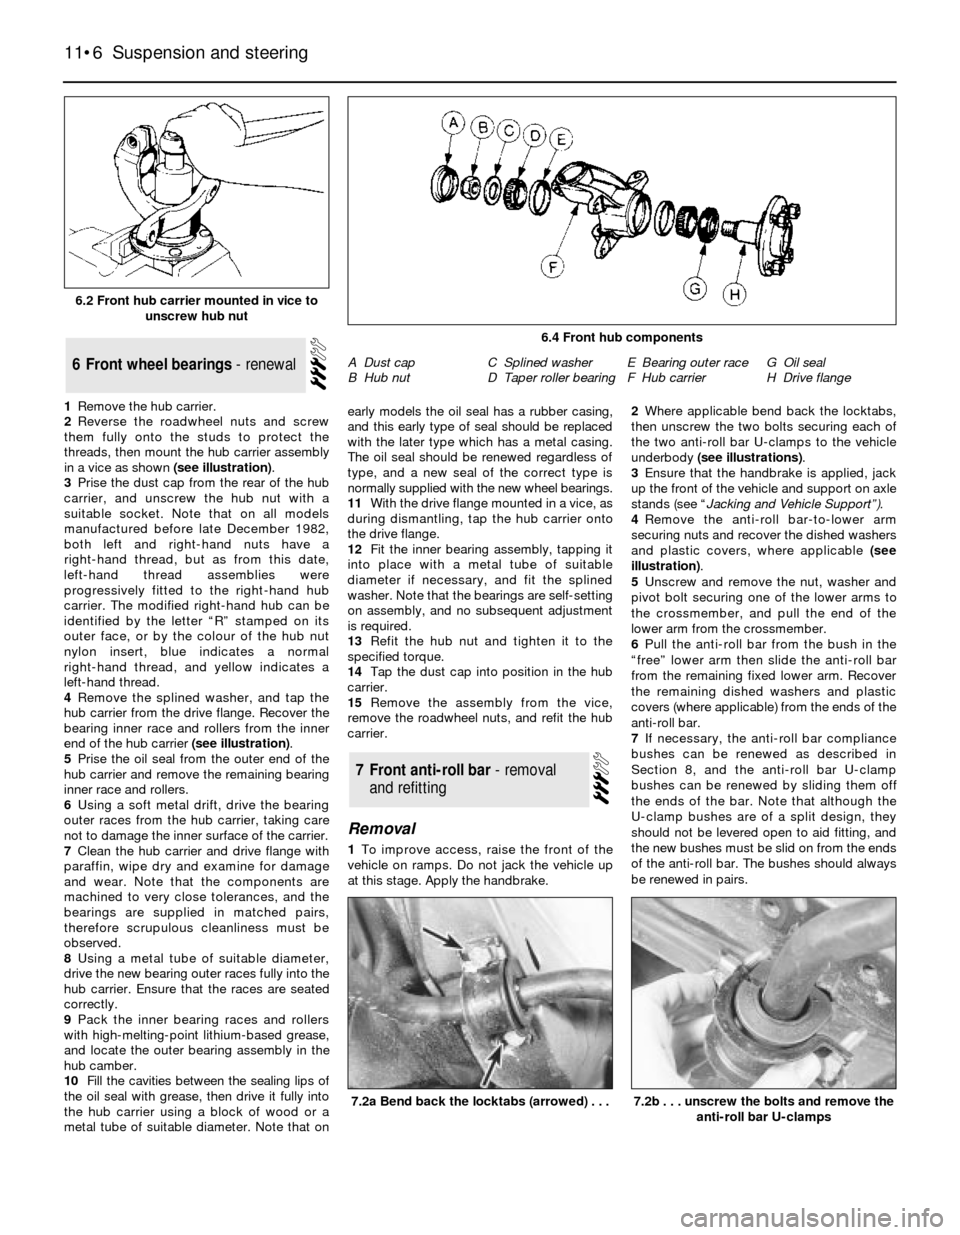 FORD SIERRA 1983 1.G Suspension And Steering Workshop Manual 1Remove the hub carrier.
2Reverse the roadwheel nuts and screw
them fully onto the studs to protect the
threads, then mount the hub carrier assembly
in a vice as shown (see illustration).
3Prise the d